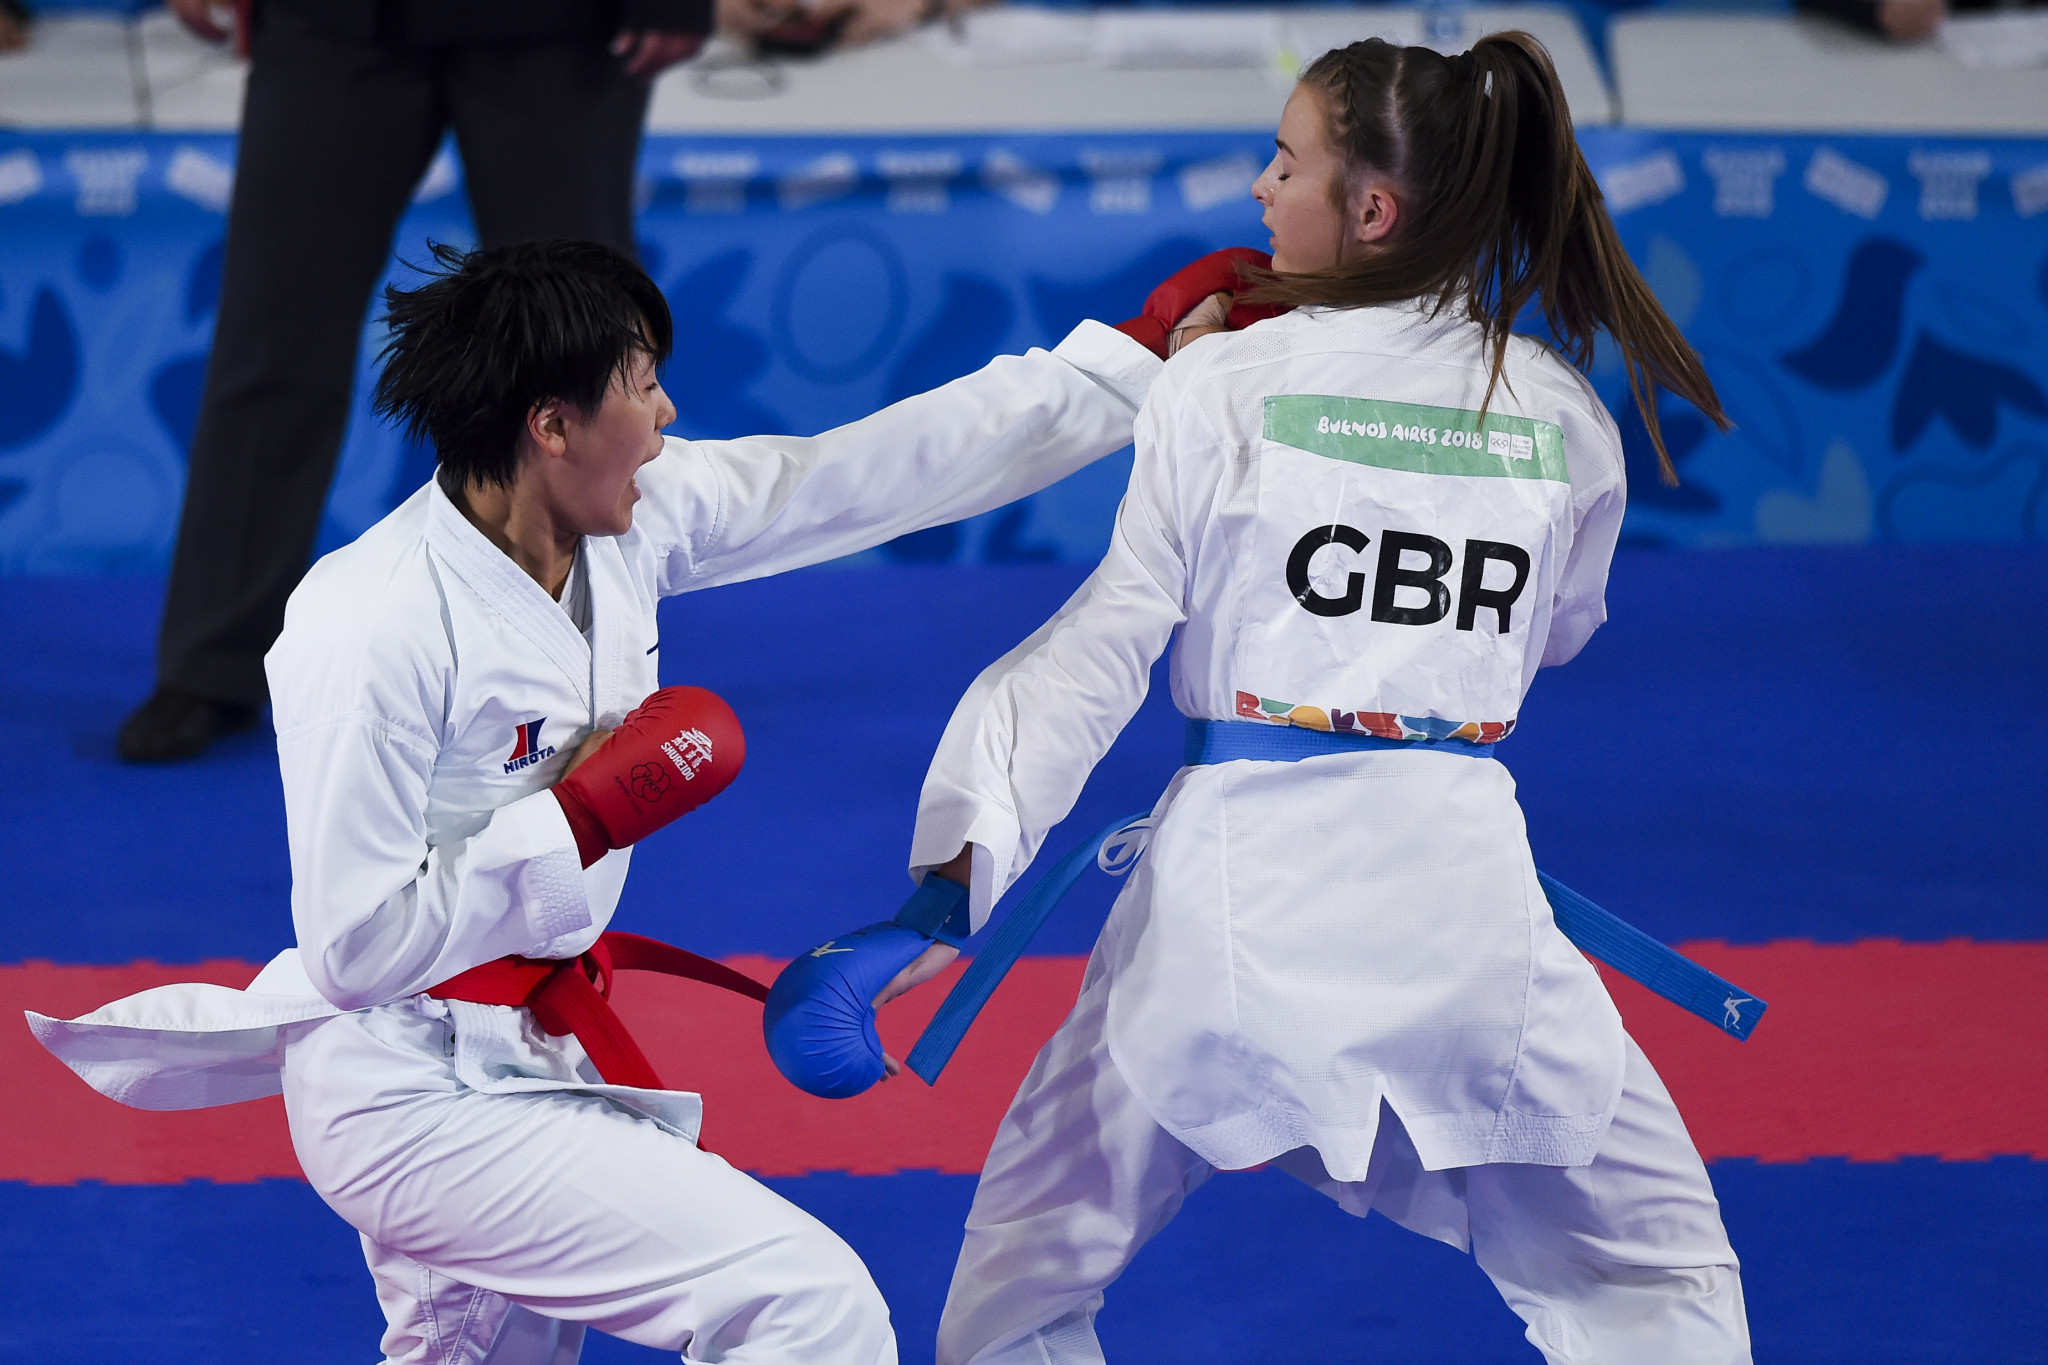 Karate made its debut at the Youth Olympic Games in Buenos Aires ©Getty Images